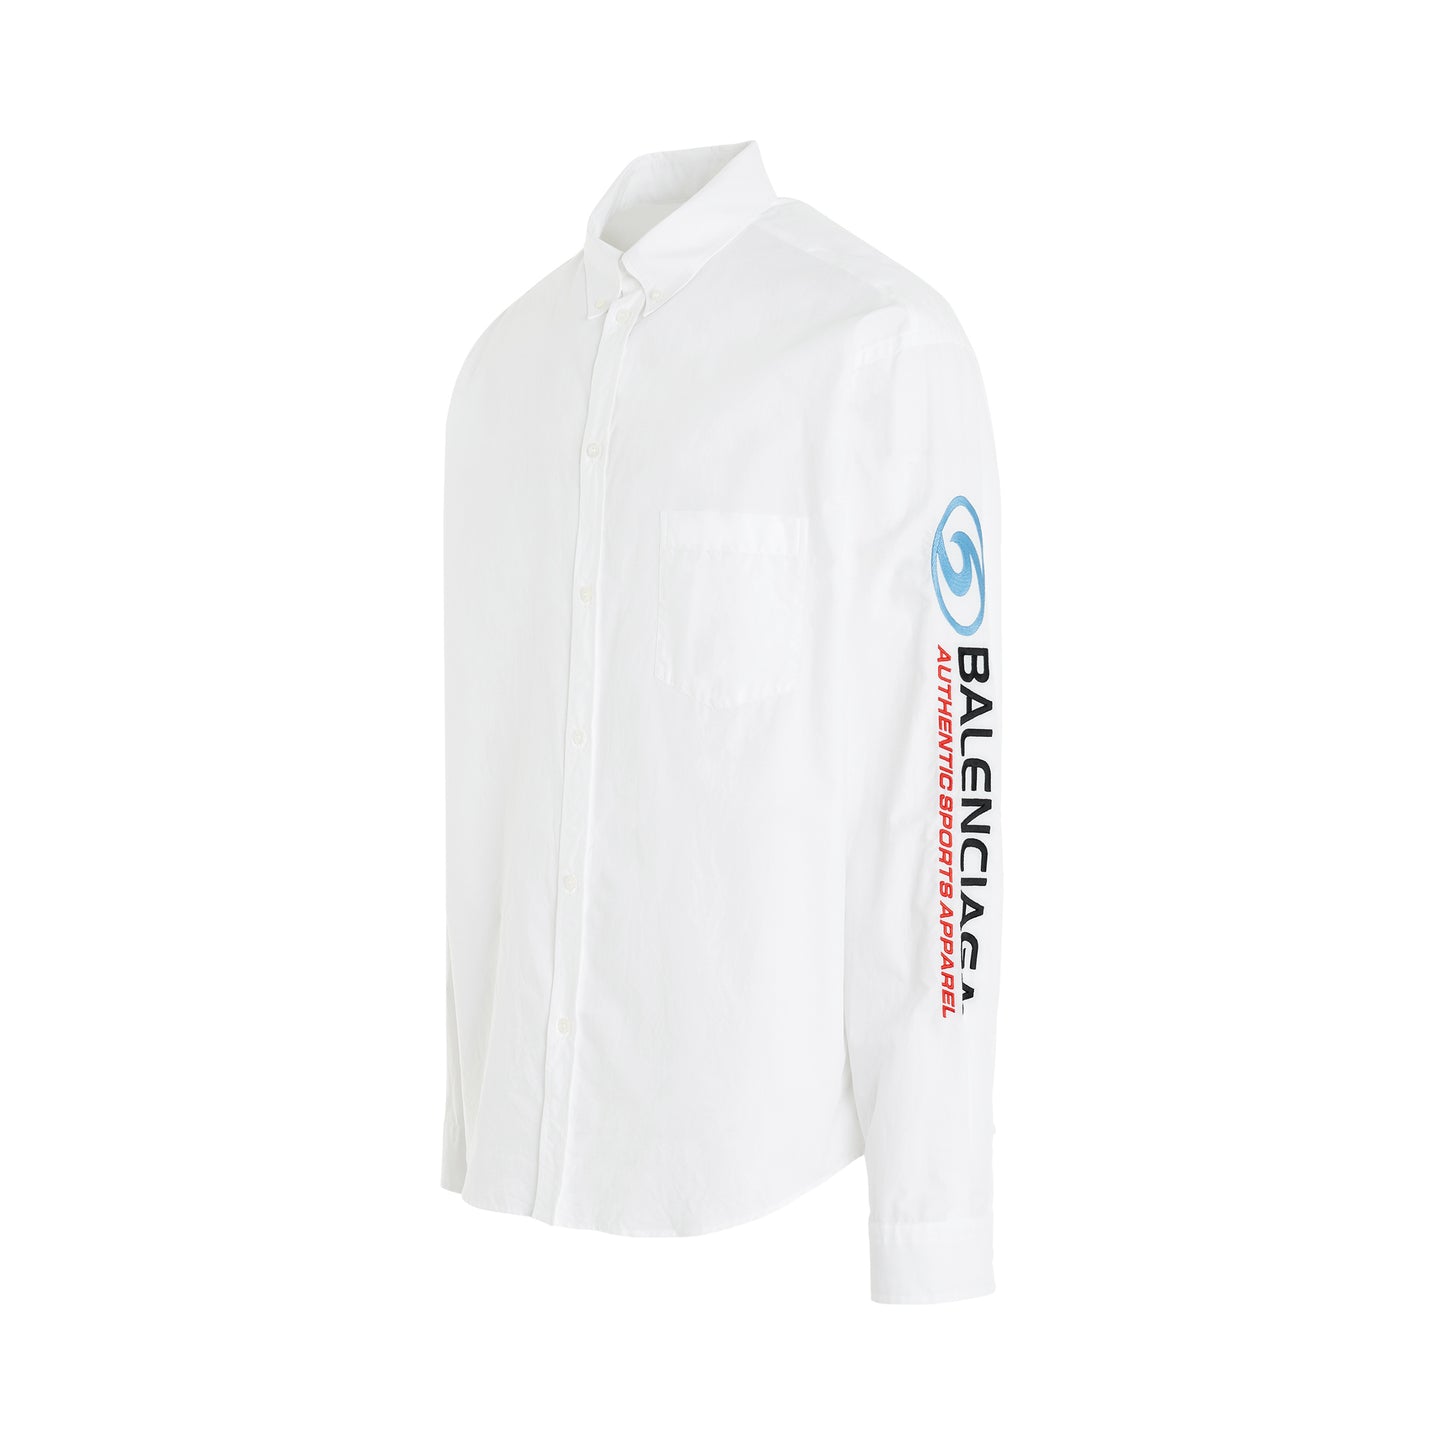 Long-Sleeve Large Fit Shirt in White